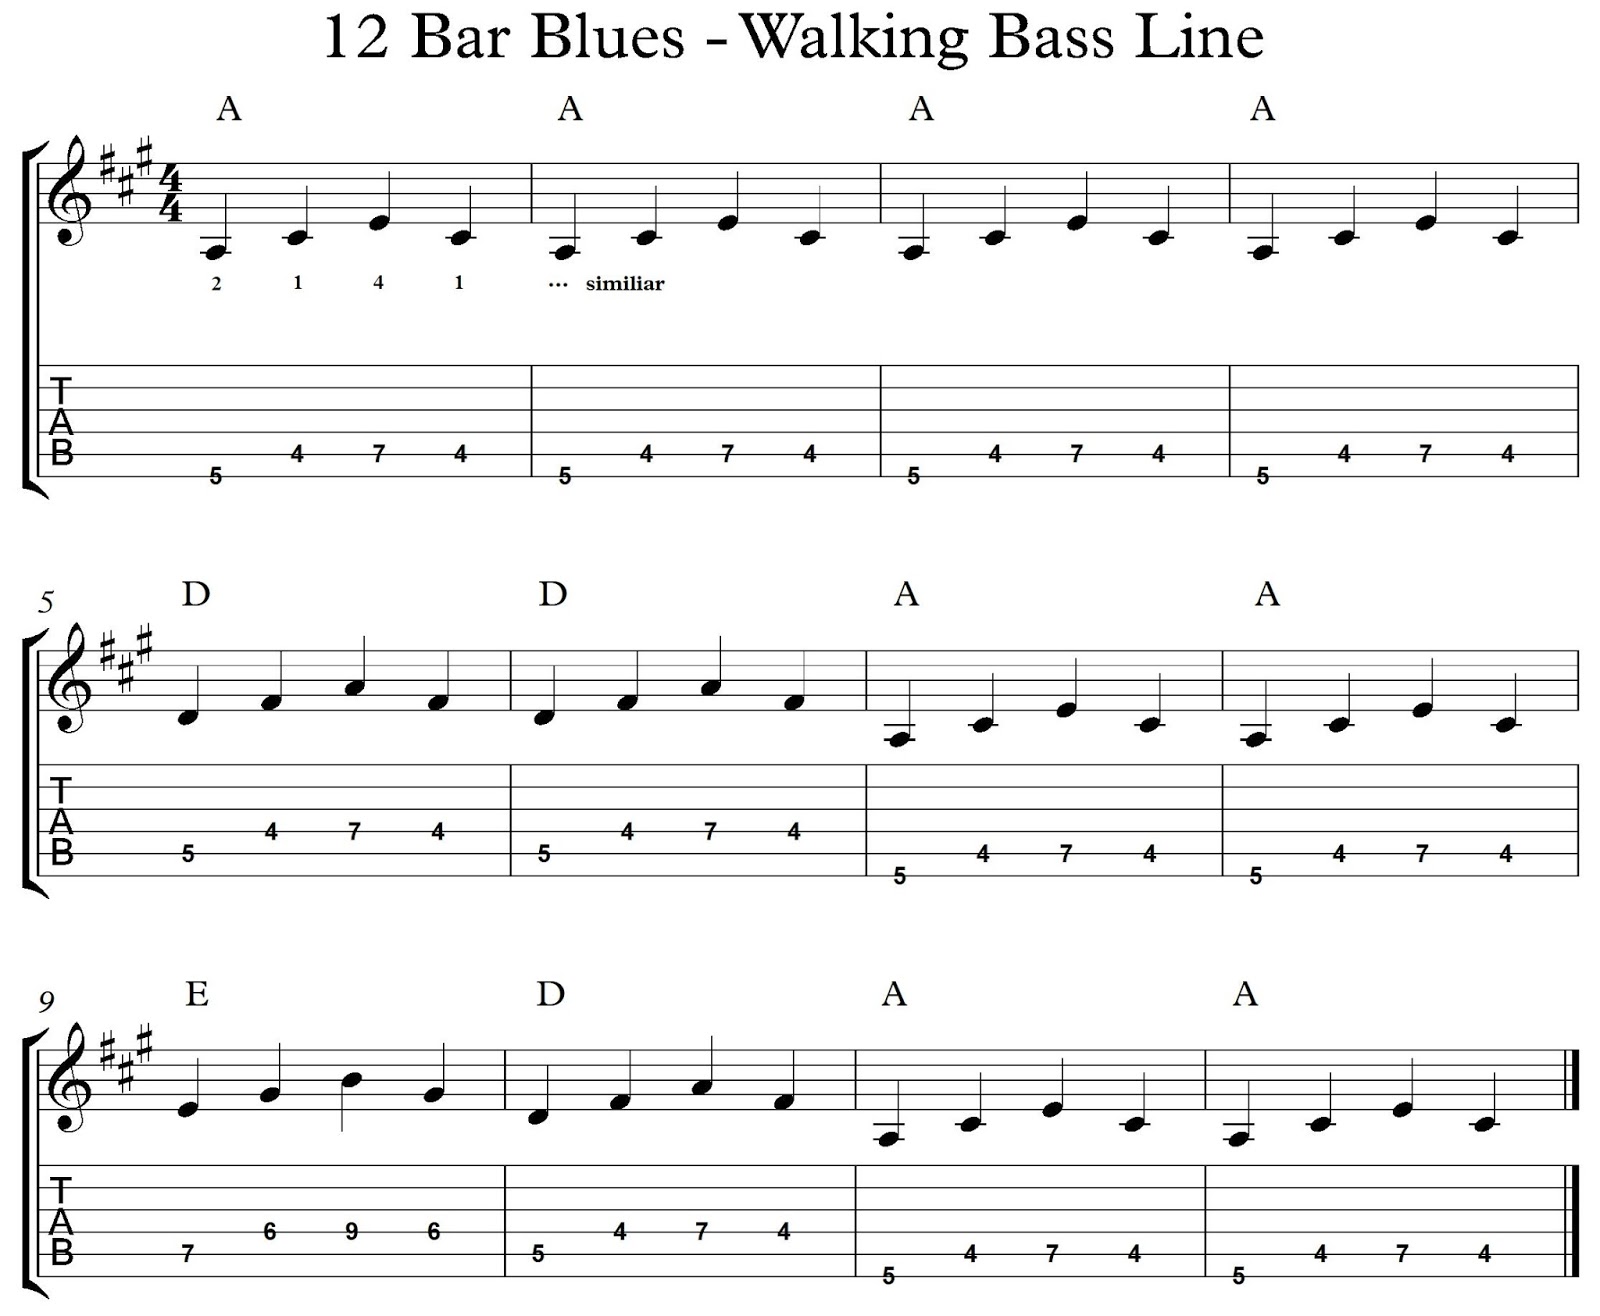 Fingerstyle Walking Bass for Guitar - PDFCOFFEE.COM